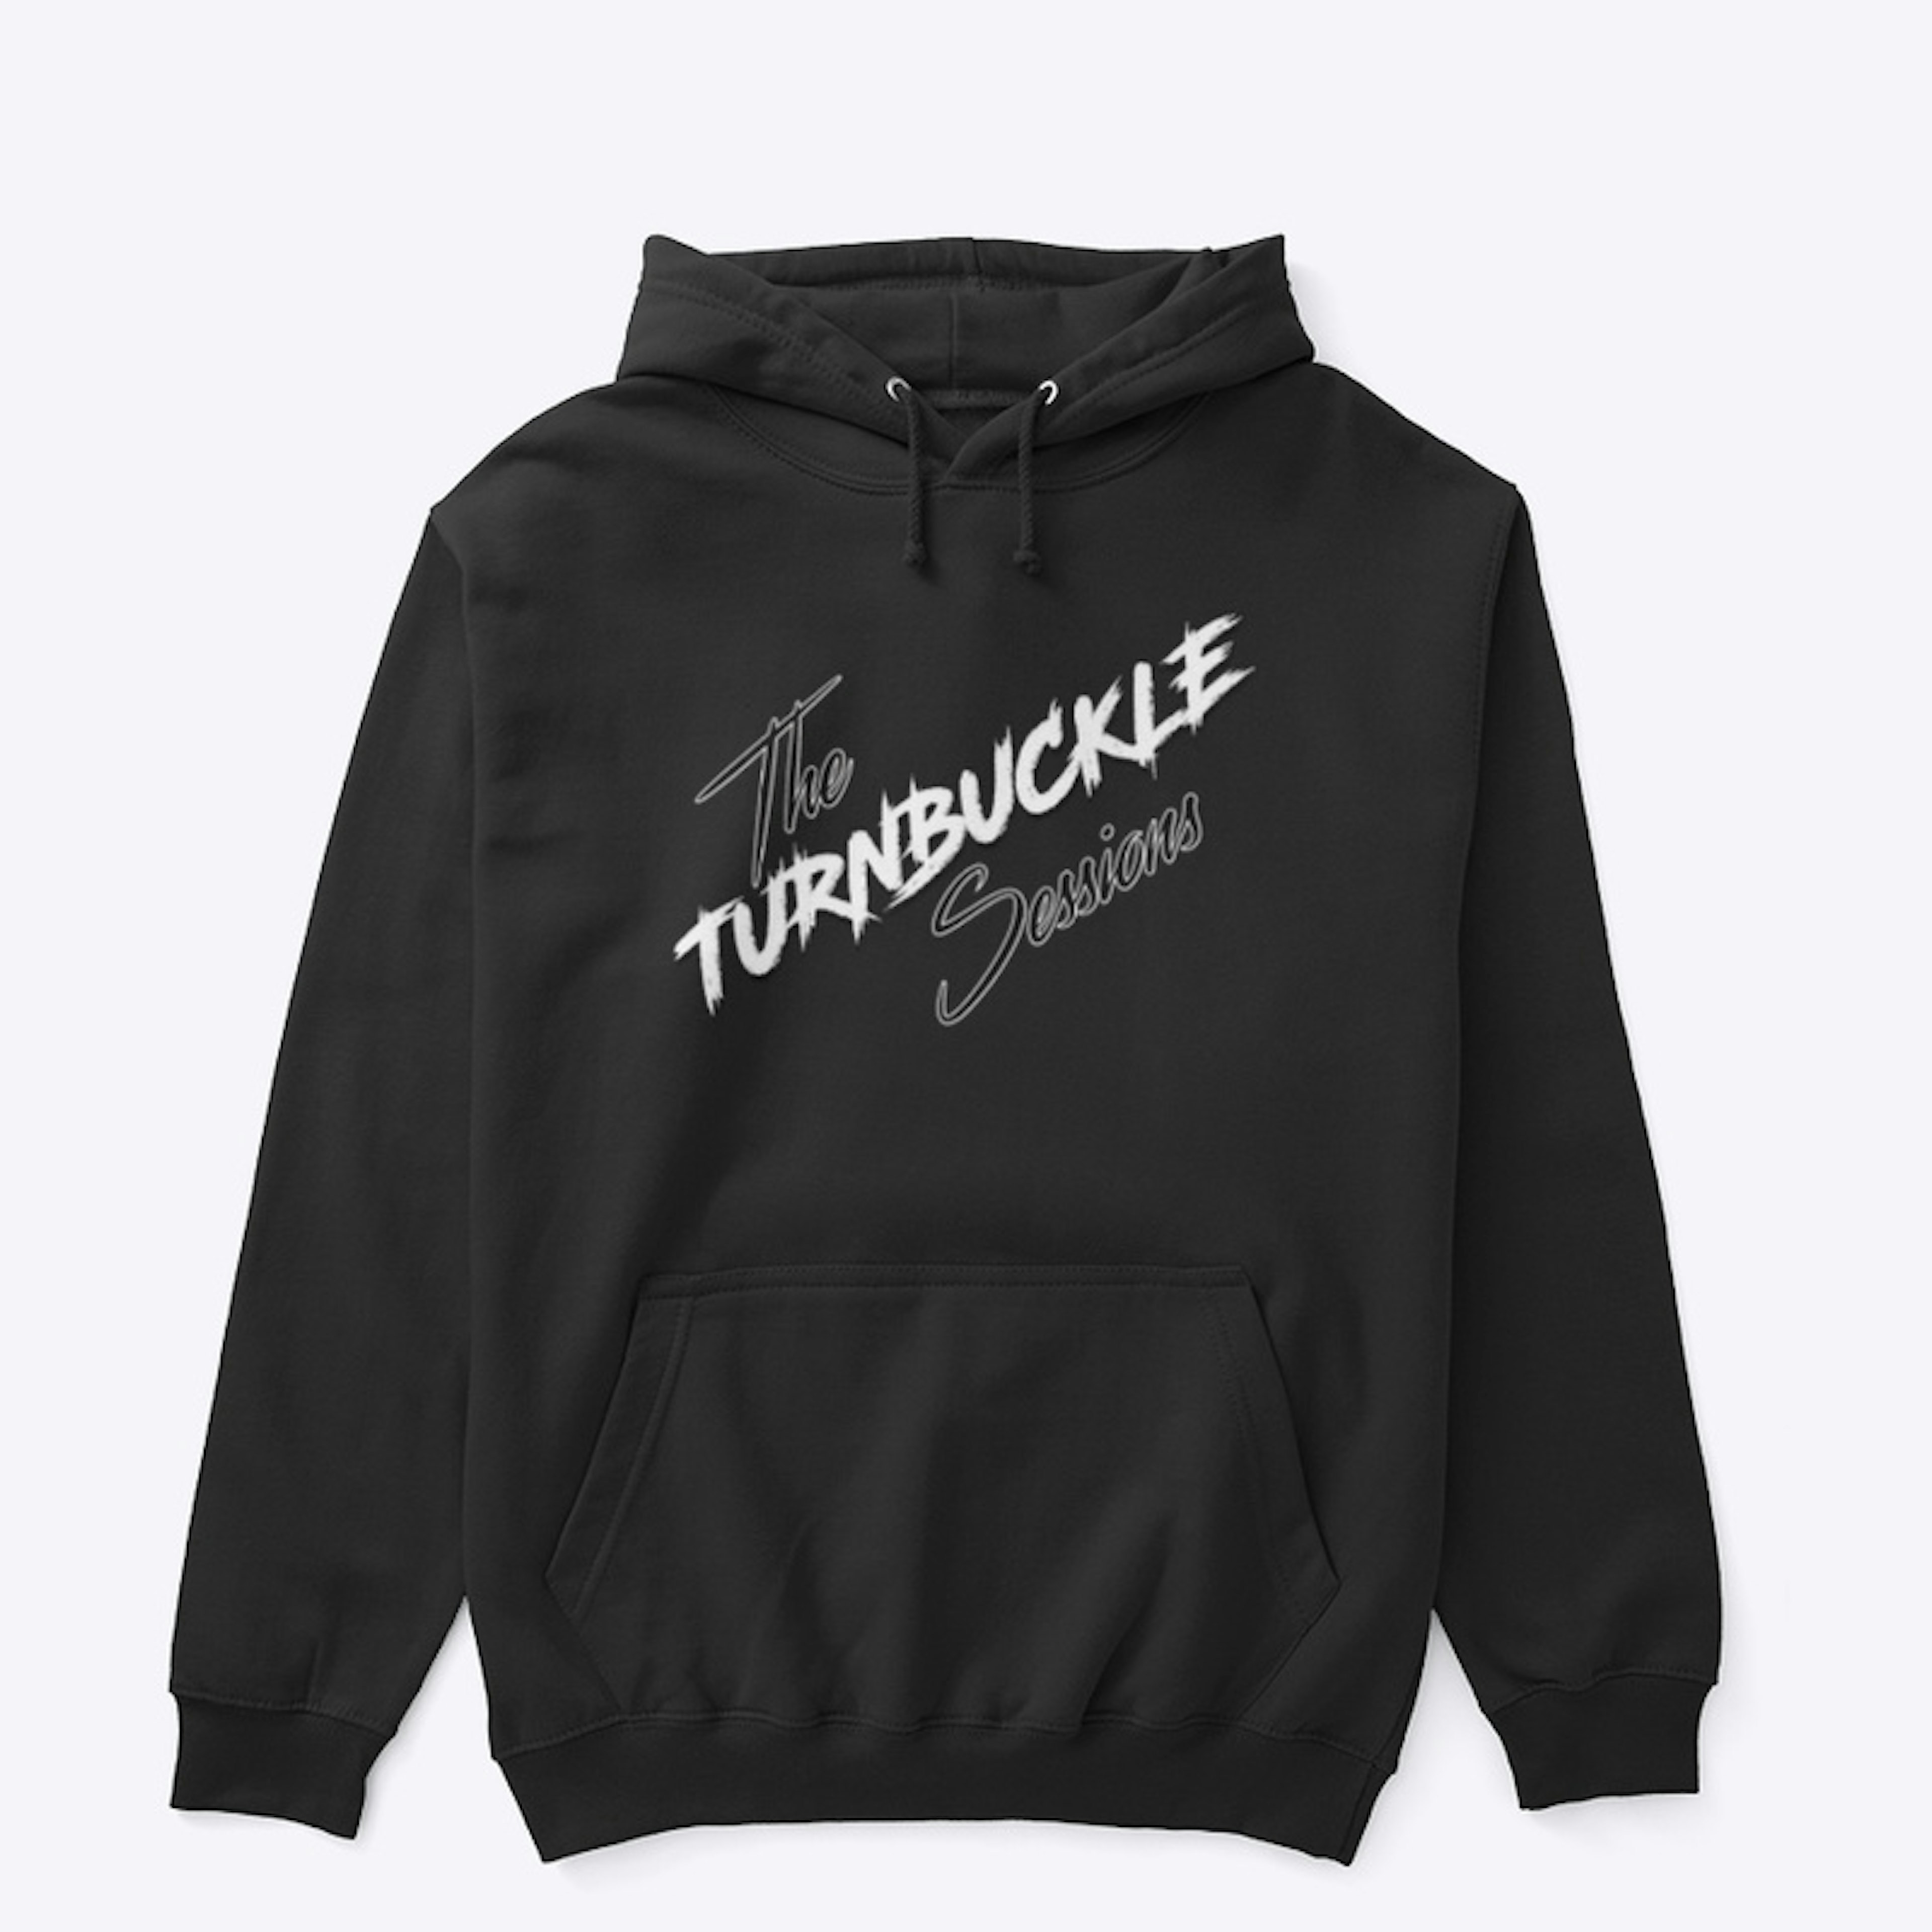 The Turnbuckle Session Hoodie